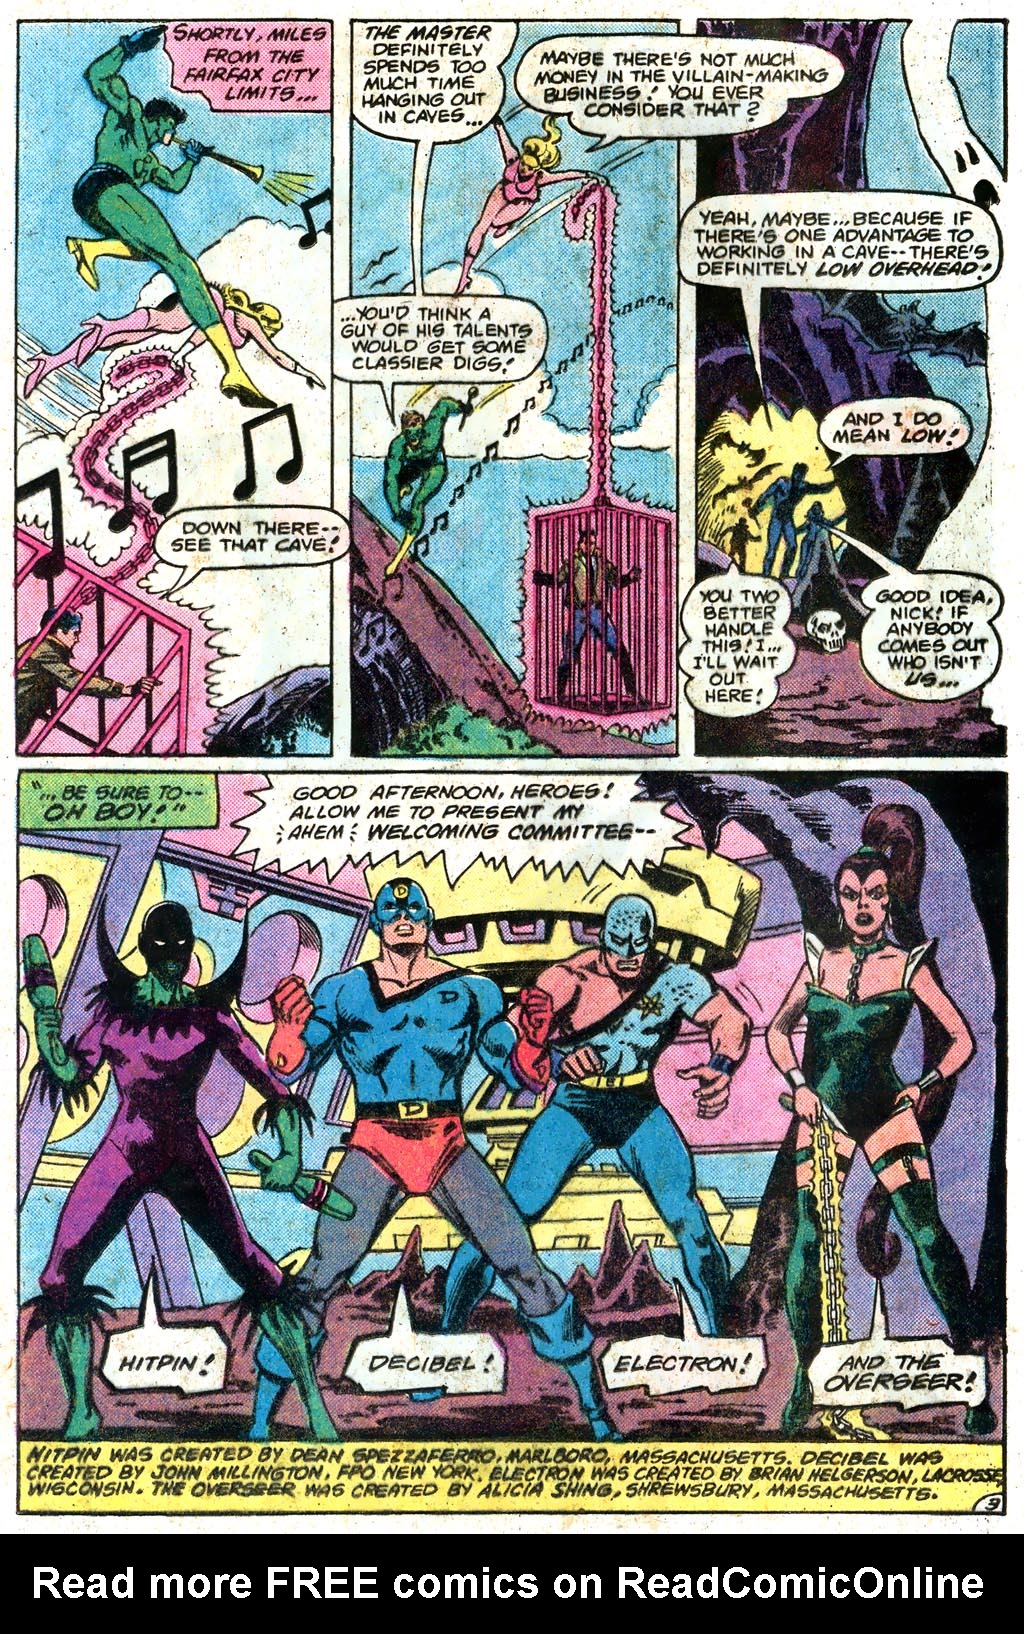 The New Adventures of Superboy 46 Page 24